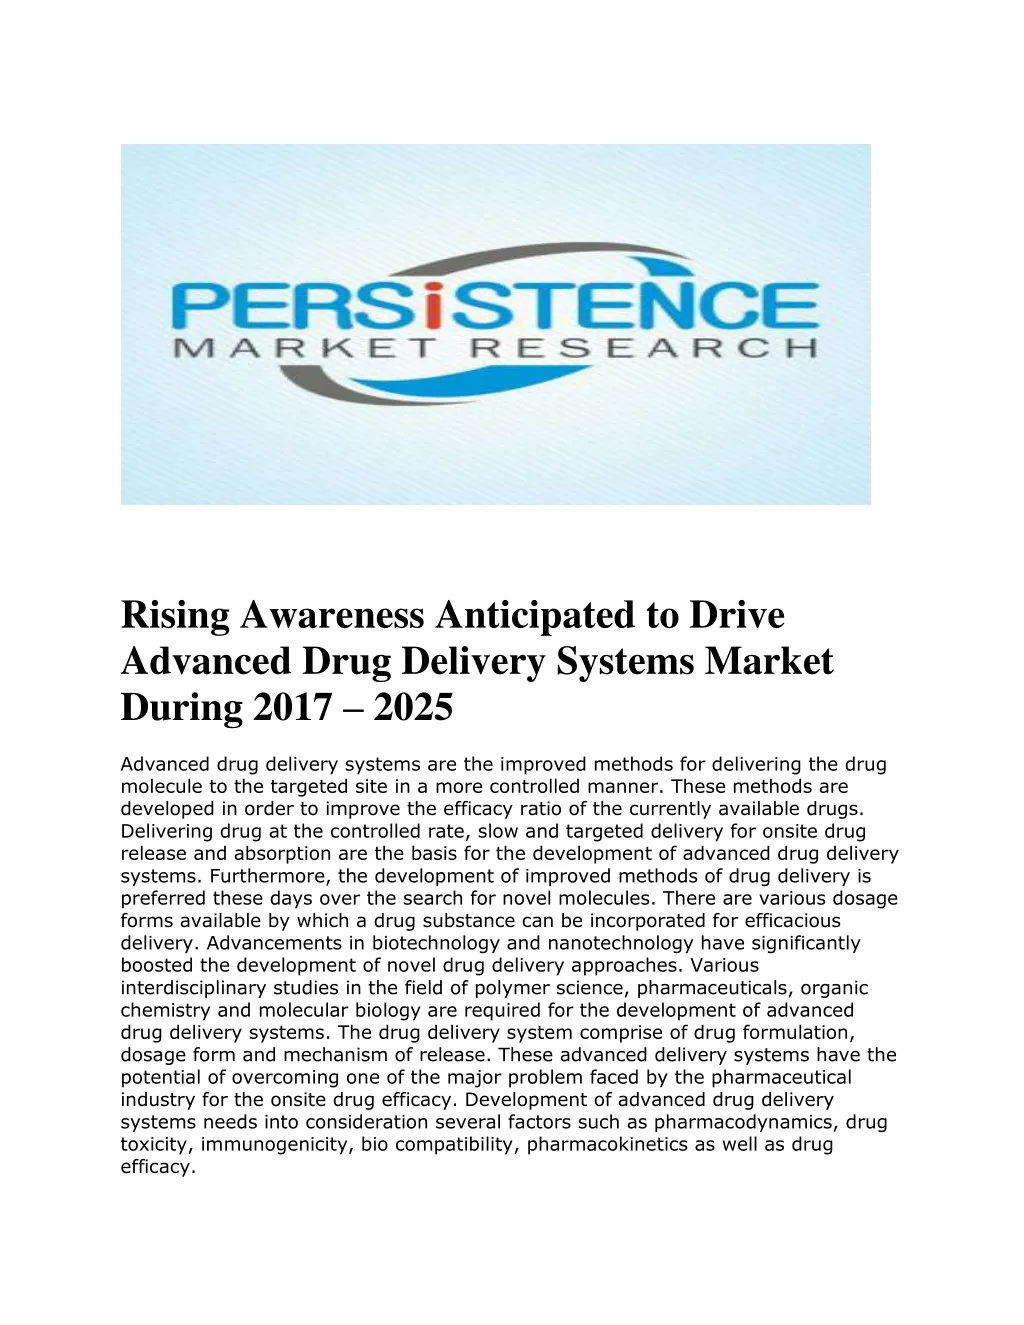 rising awareness anticipated to drive advanced